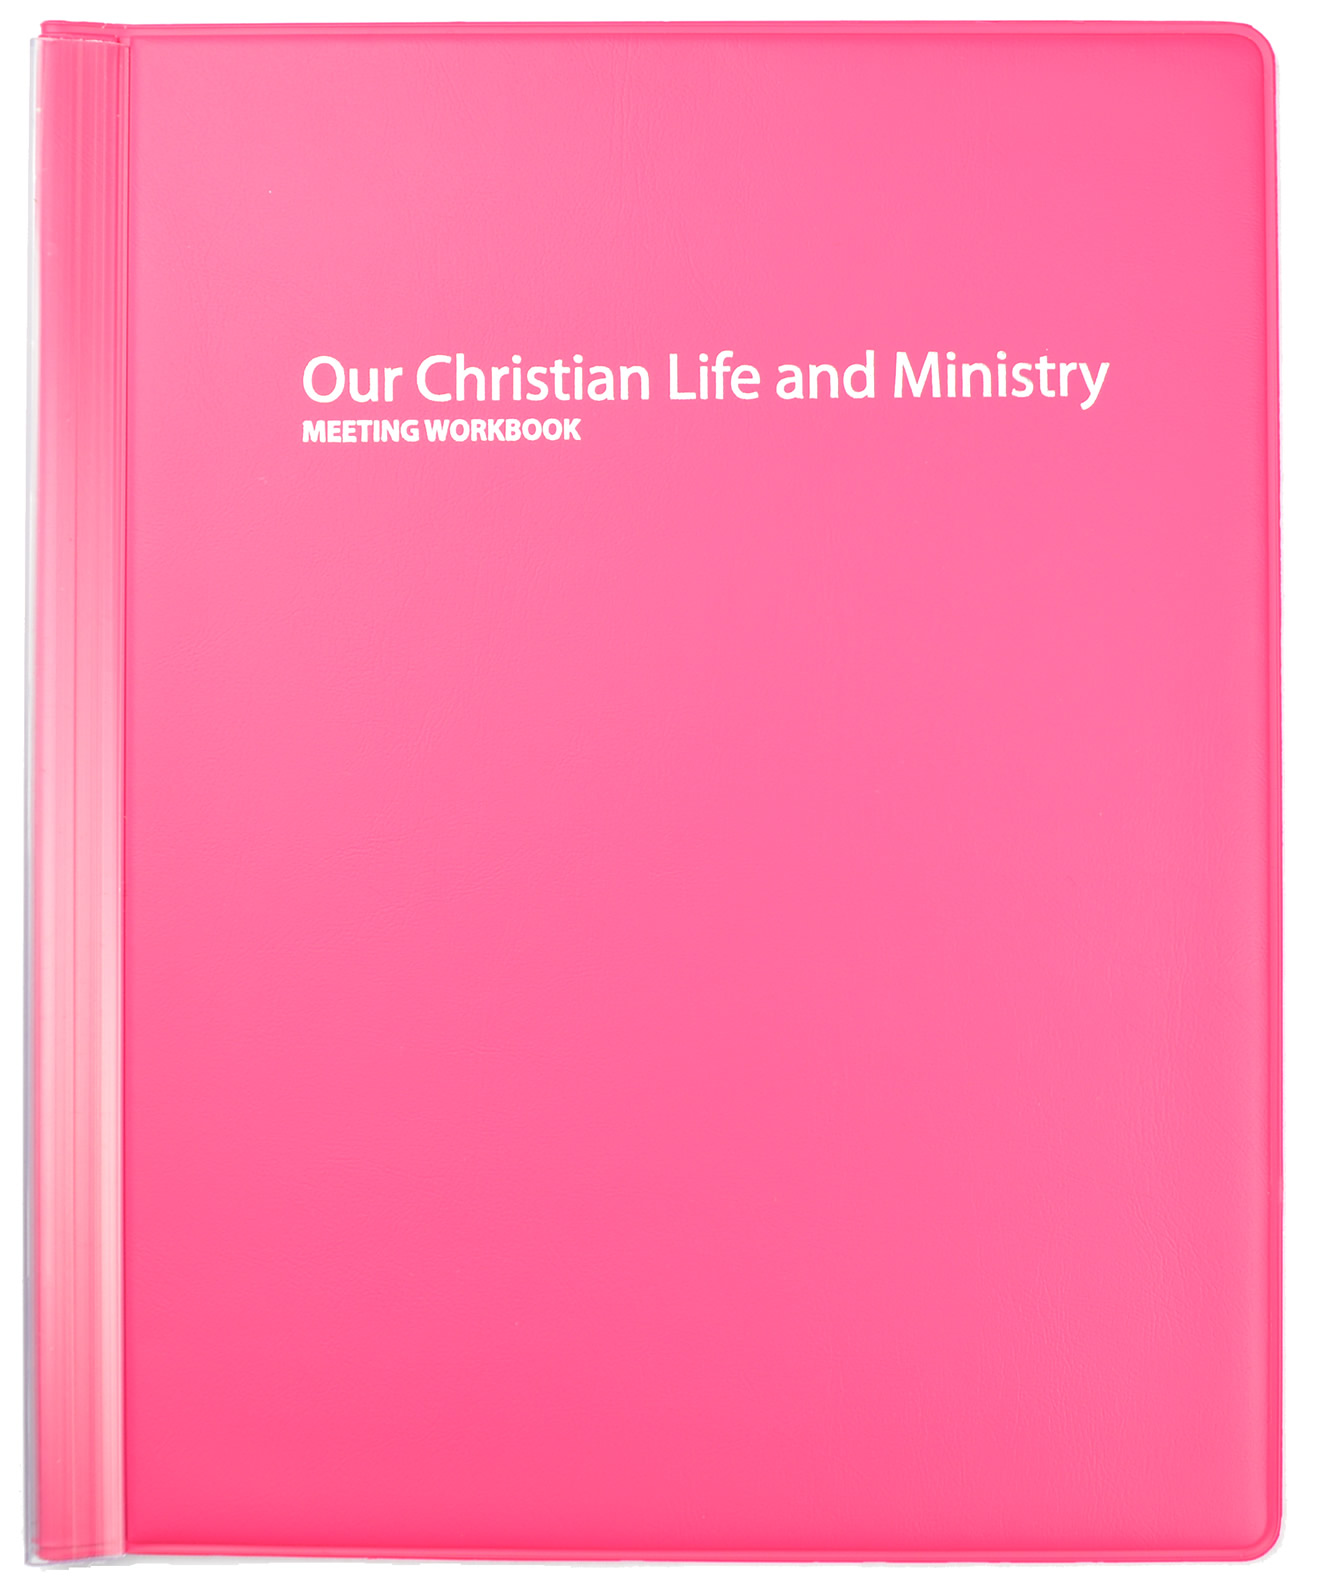 Our Christian Life and Ministry Meeting Workbook Folder - PINK  - PINK